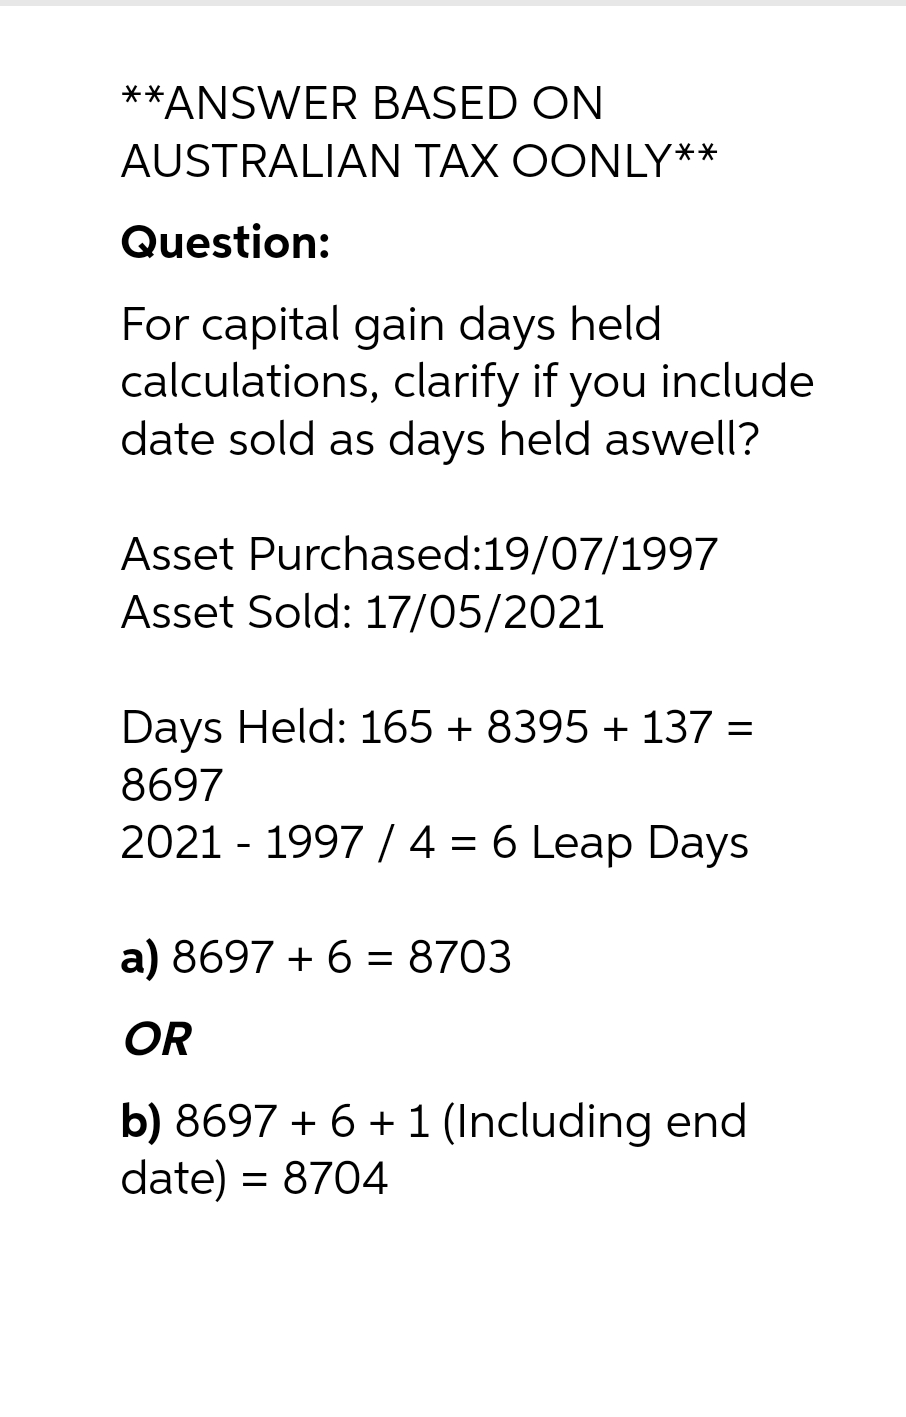 **ANSWER BASED ON
AUSTRALIAN TAX OONLY**
Question:
For capital gain days held
calculations, clarify if you include
date sold as days held aswell?
Asset Purchased:19/07/1997
Asset Sold: 17/05/2021
Days Held: 165 + 8395 + 137 =
8697
2021 - 1997 / 4 = 6 Leap Days
a) 8697 + 6 = 8703
OR
b) 8697 + 6 + 1 (Including end
date) = 8704